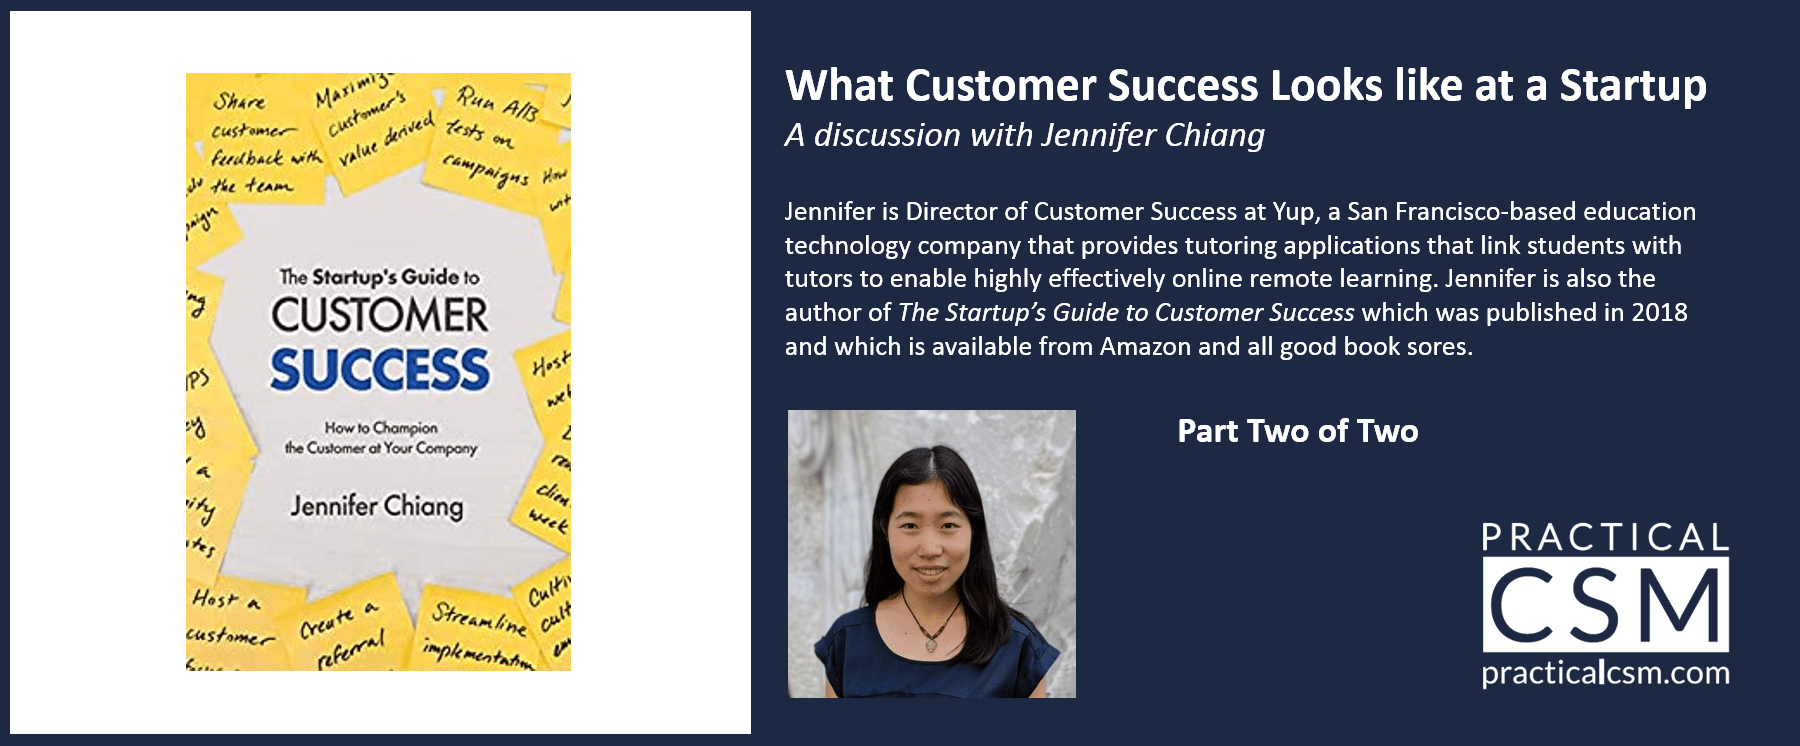 Practical CSM What Customer Success Looks Like at a Startup with Jennifer Chiang part 2